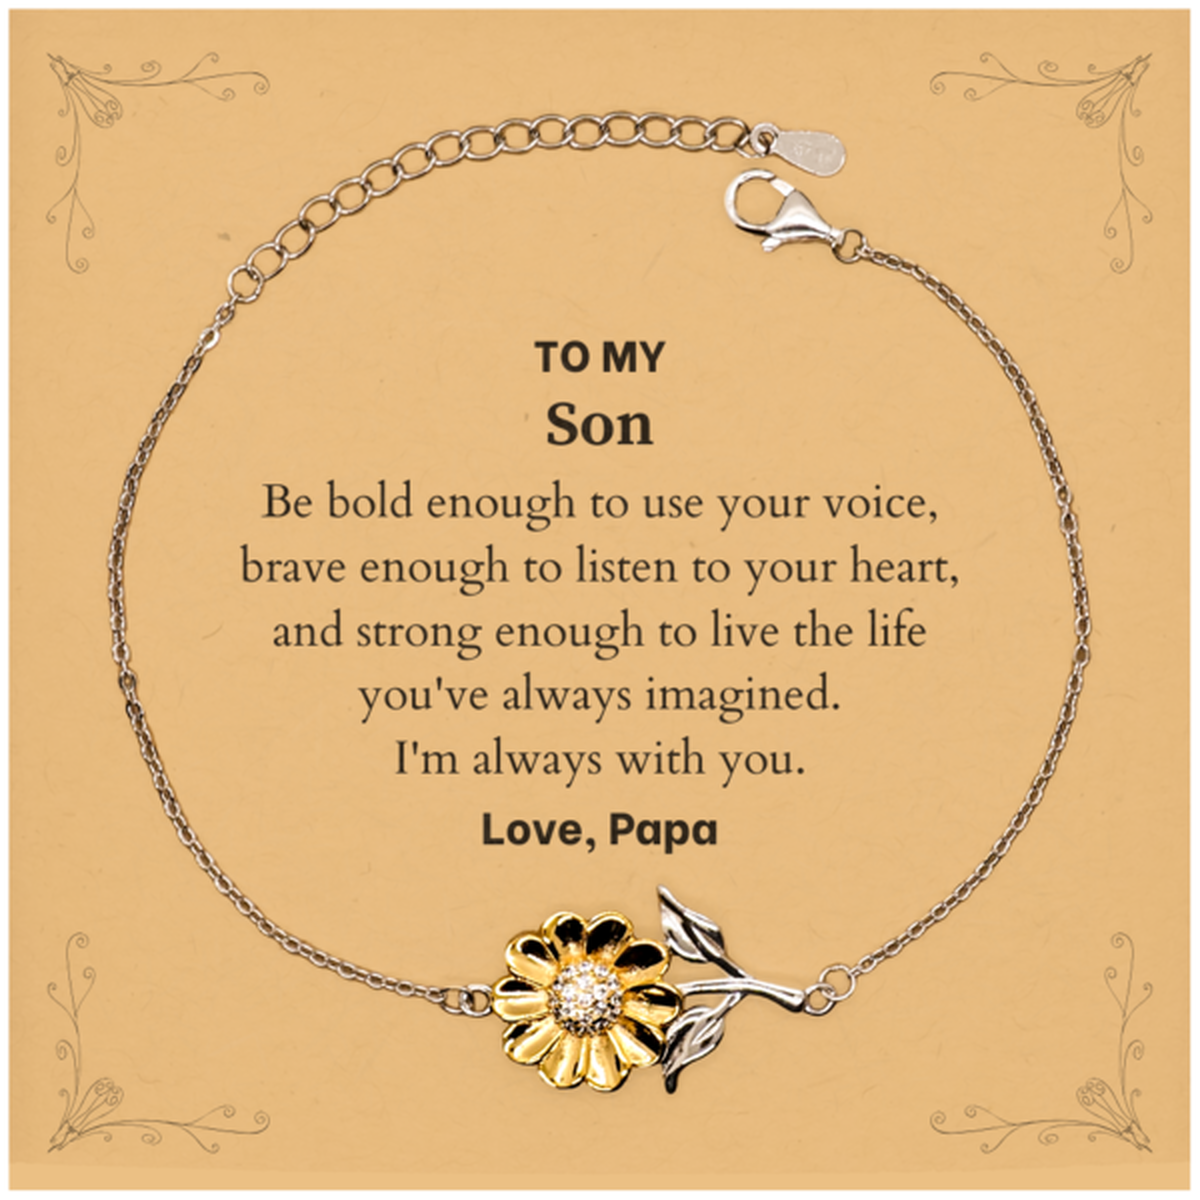 Keepsake Son Sunflower Bracelet Gift Idea Graduation Christmas Birthday Son from Papa, Son Be bold enough to use your voice, brave enough to listen to your heart. Love, Papa